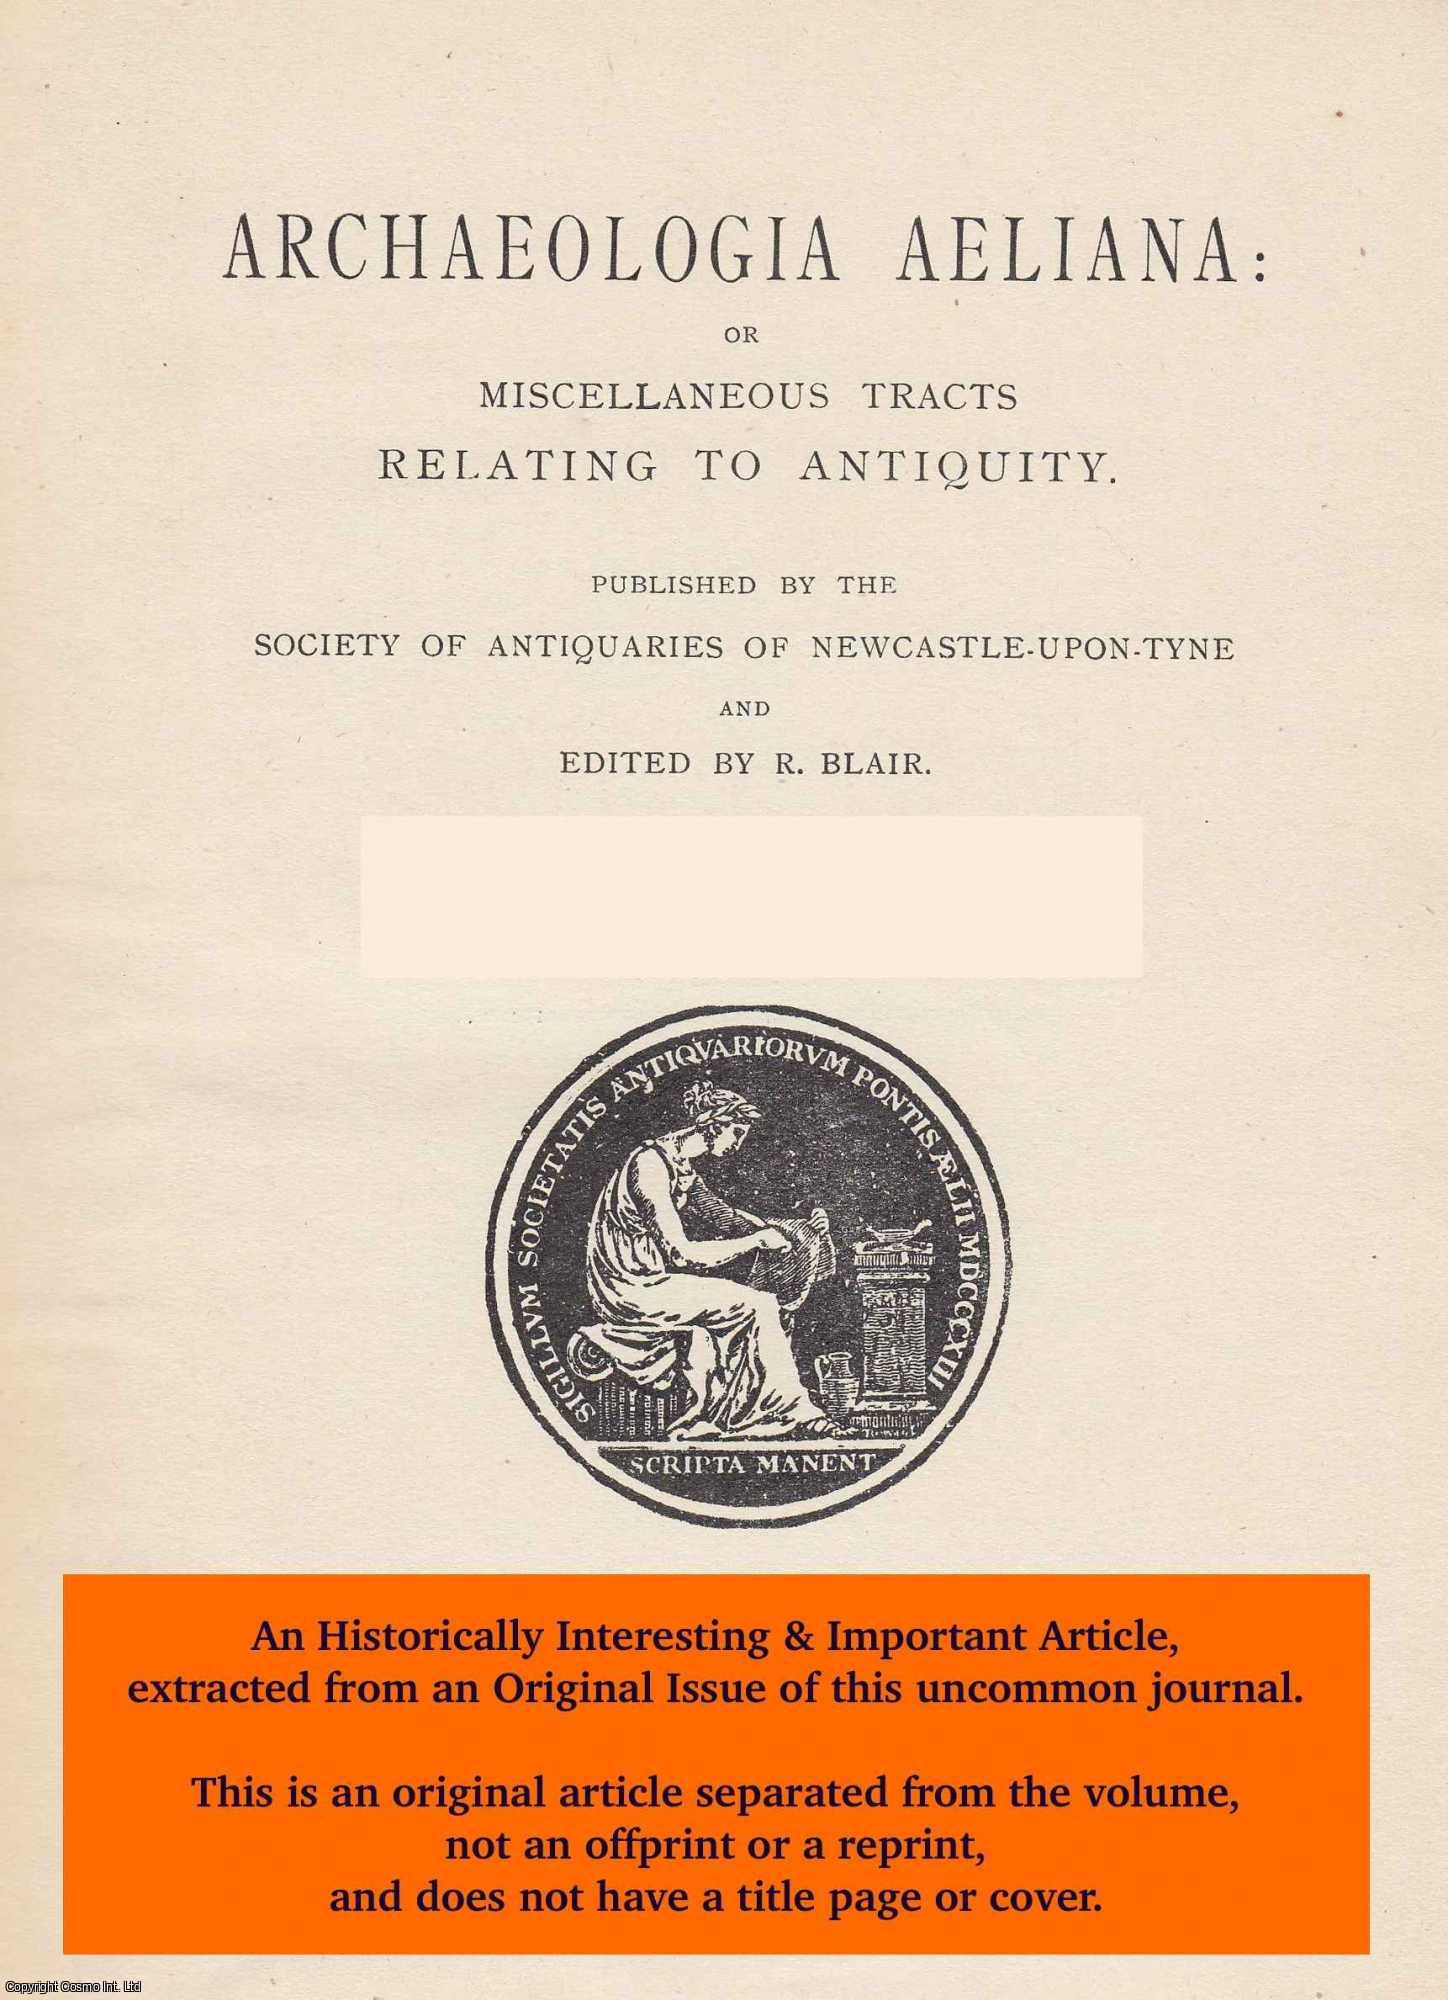 No Author Stated - Catalogue of The Inscribed and Sculptured Stones of The Roman Era in Possession of The Society of Antiquaries of Newcastle-Upon-Tyne. An original article from The Archaeologia Aeliana: or Miscellaneous Tracts Relating to Antiquity, 1920.